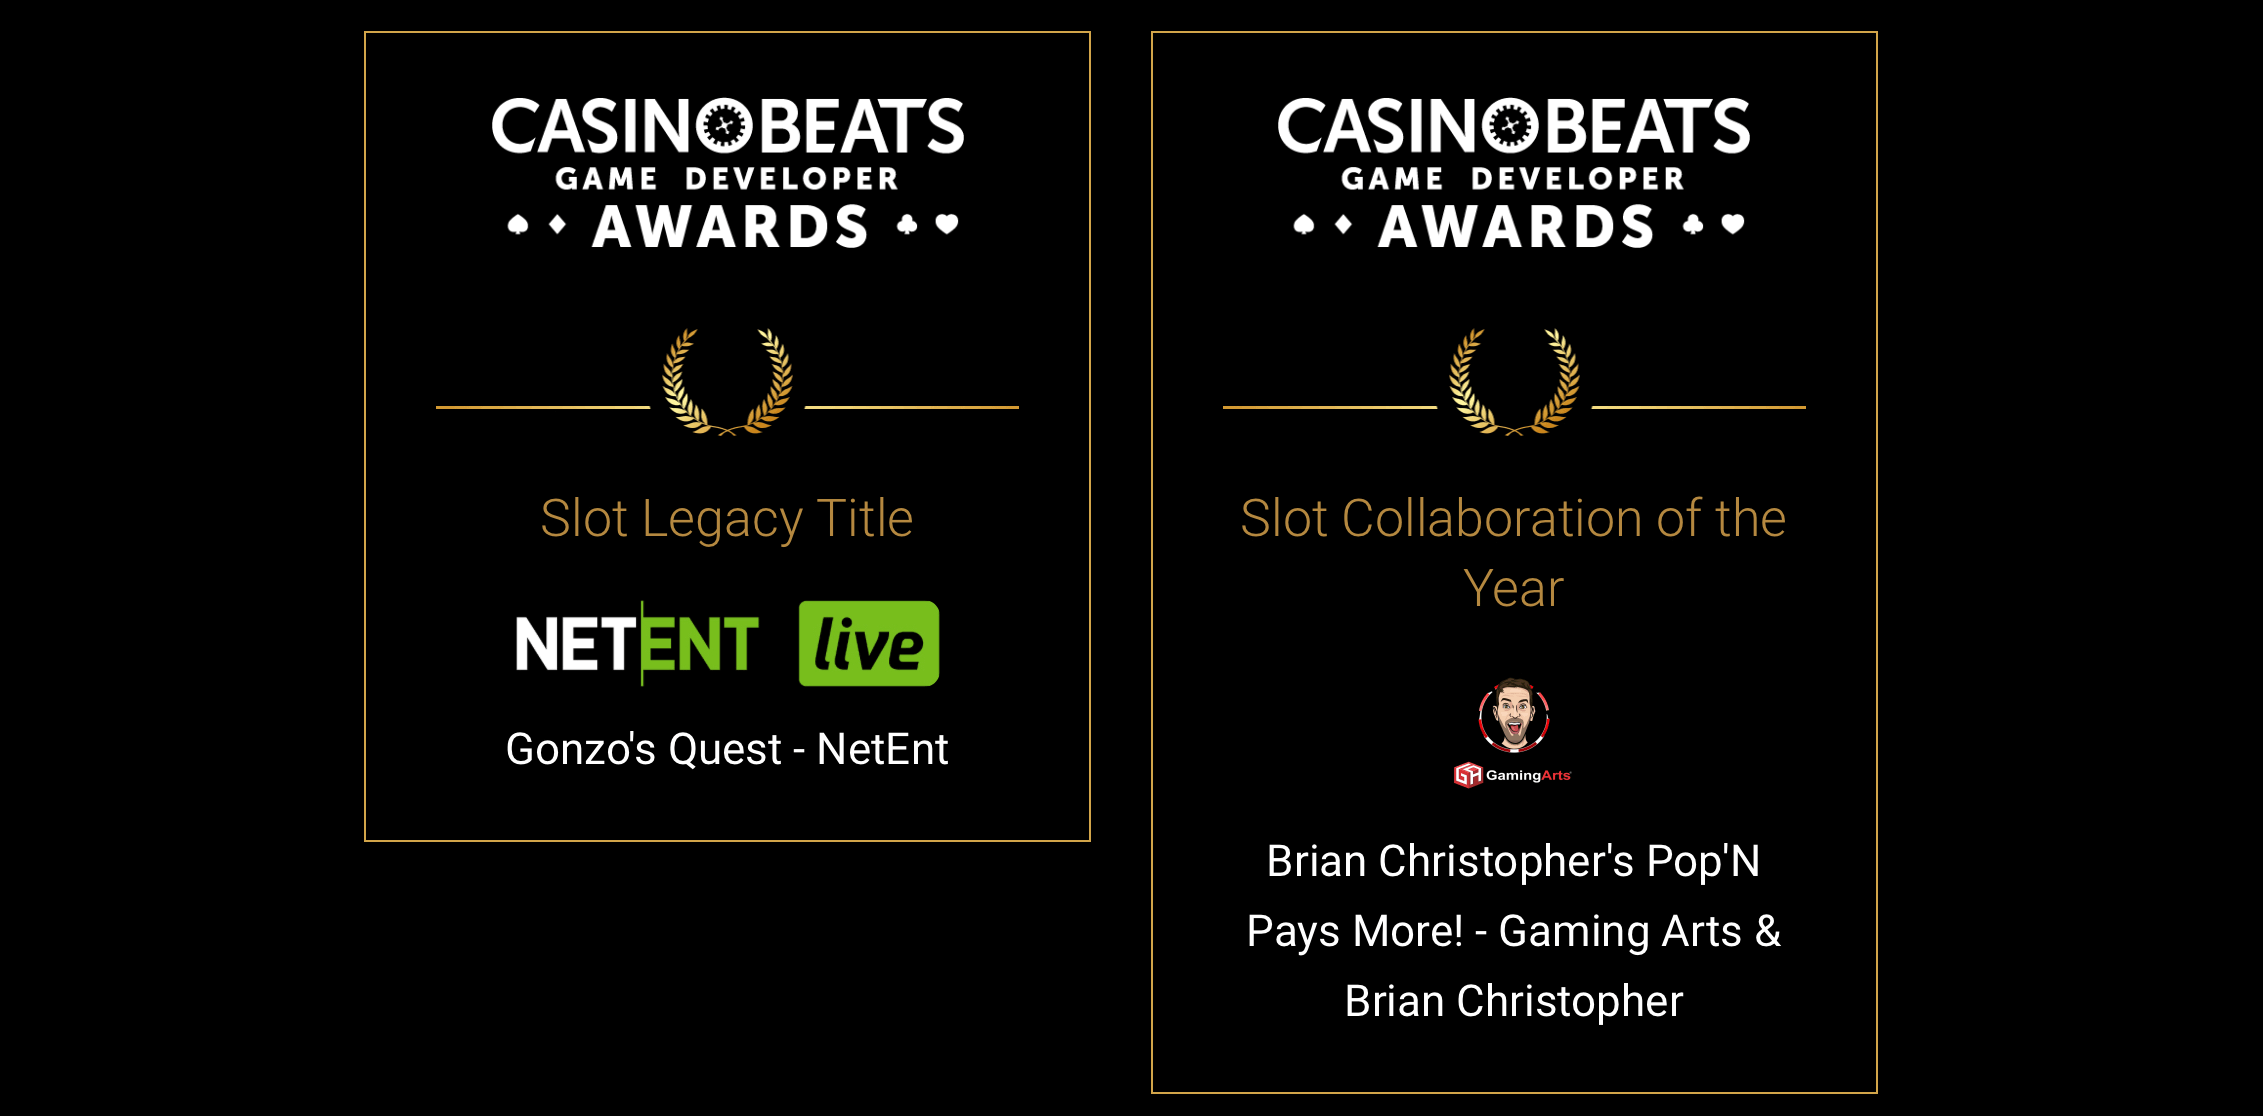 CasinoBeats Game Developer Awards - Slot Legacy Title & Slot Collaboration of the Year